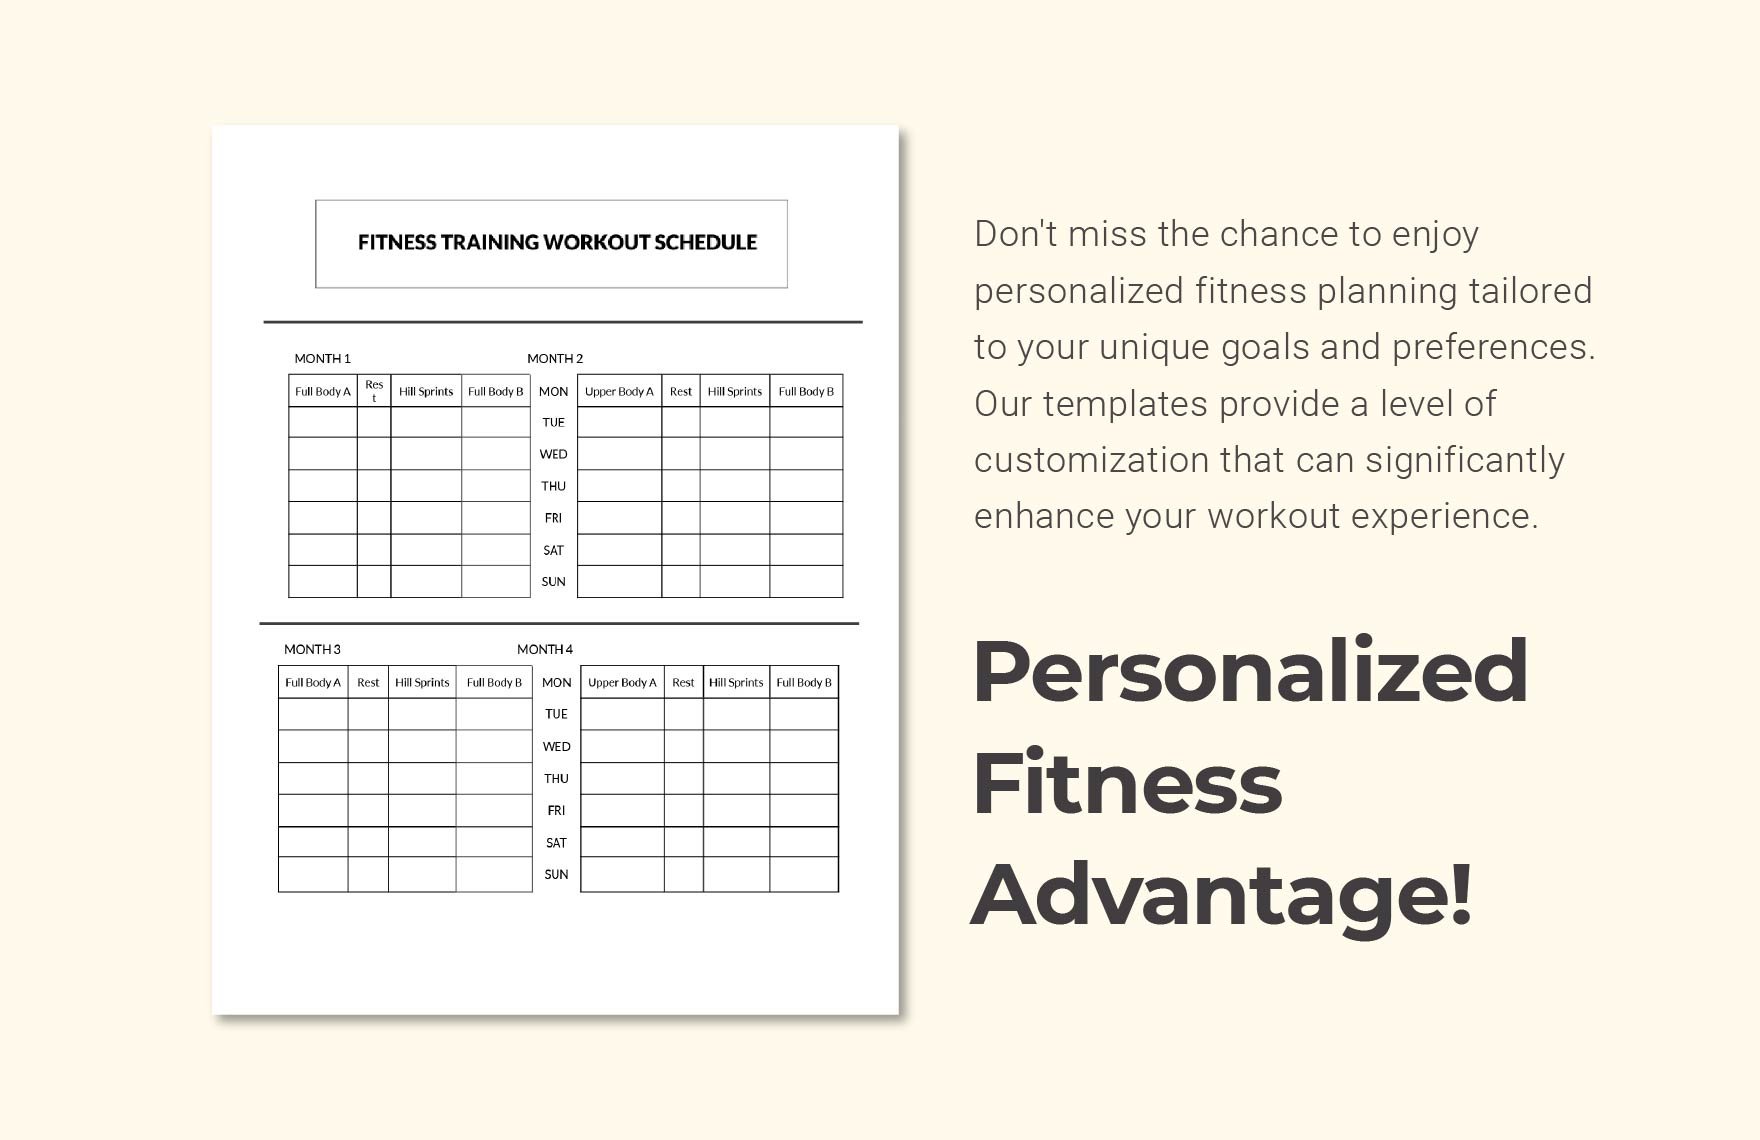 Workout Training Schedule Template